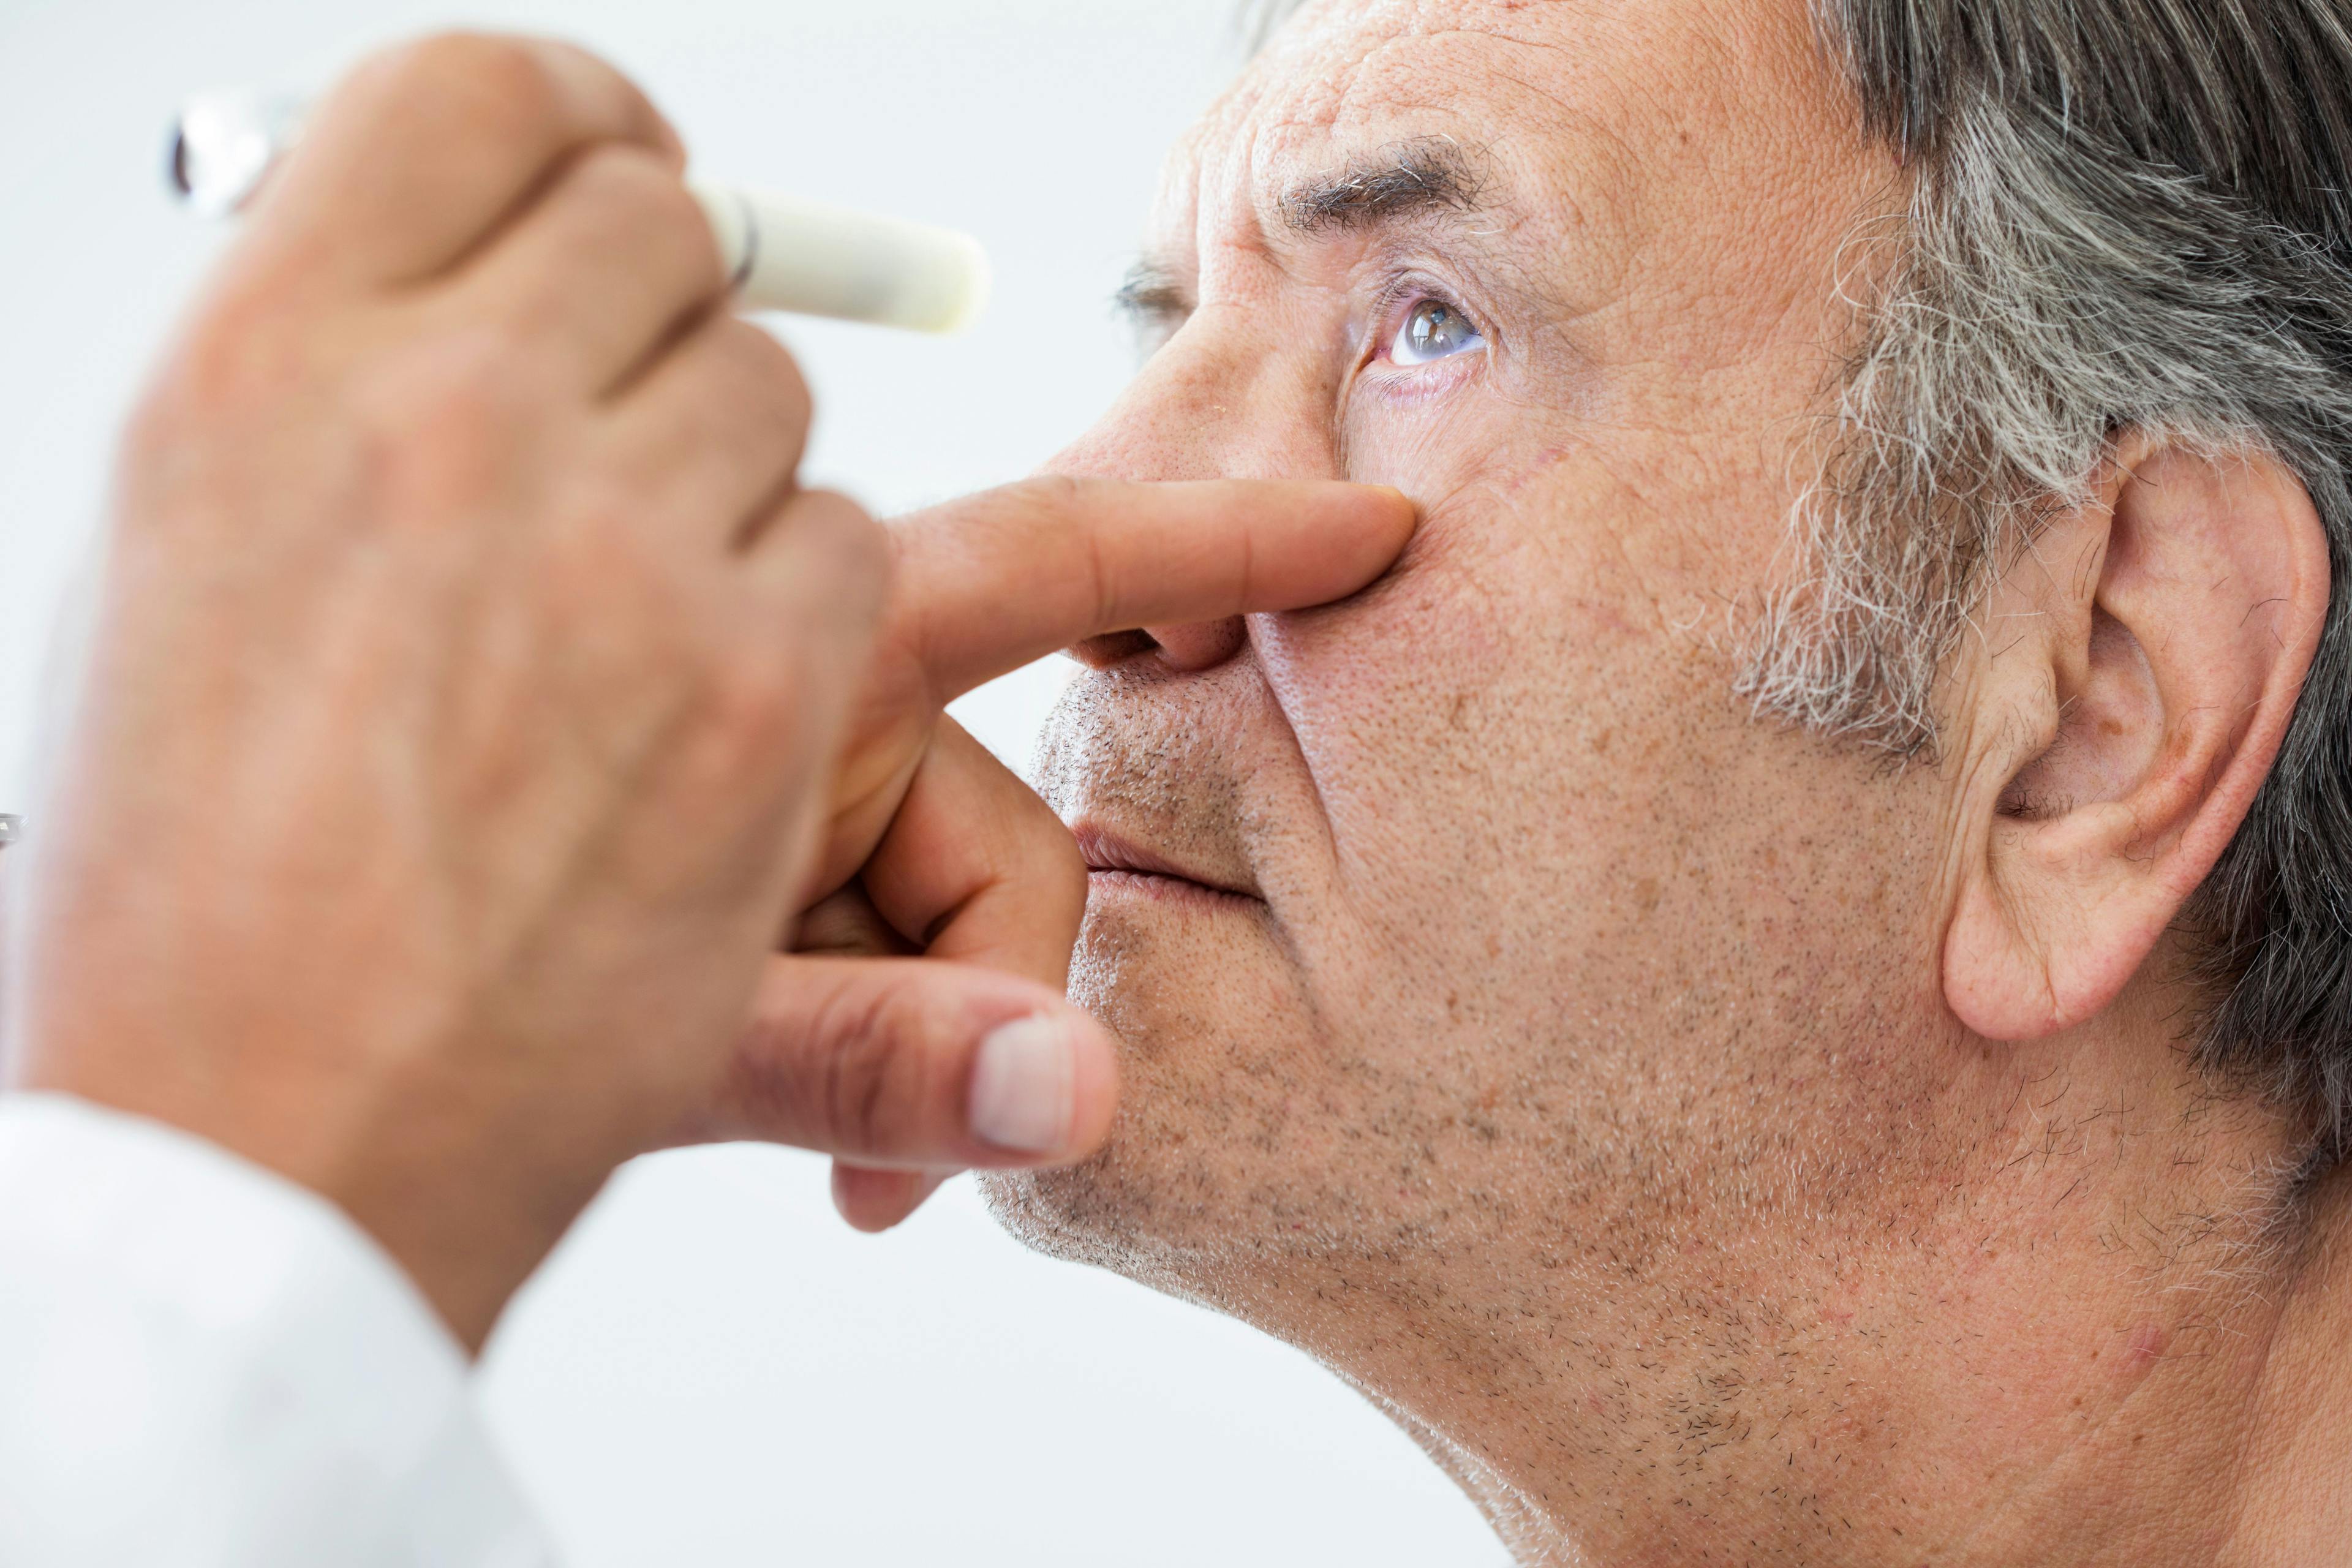 Diabetes-Related Eye Disease Remains High In United States